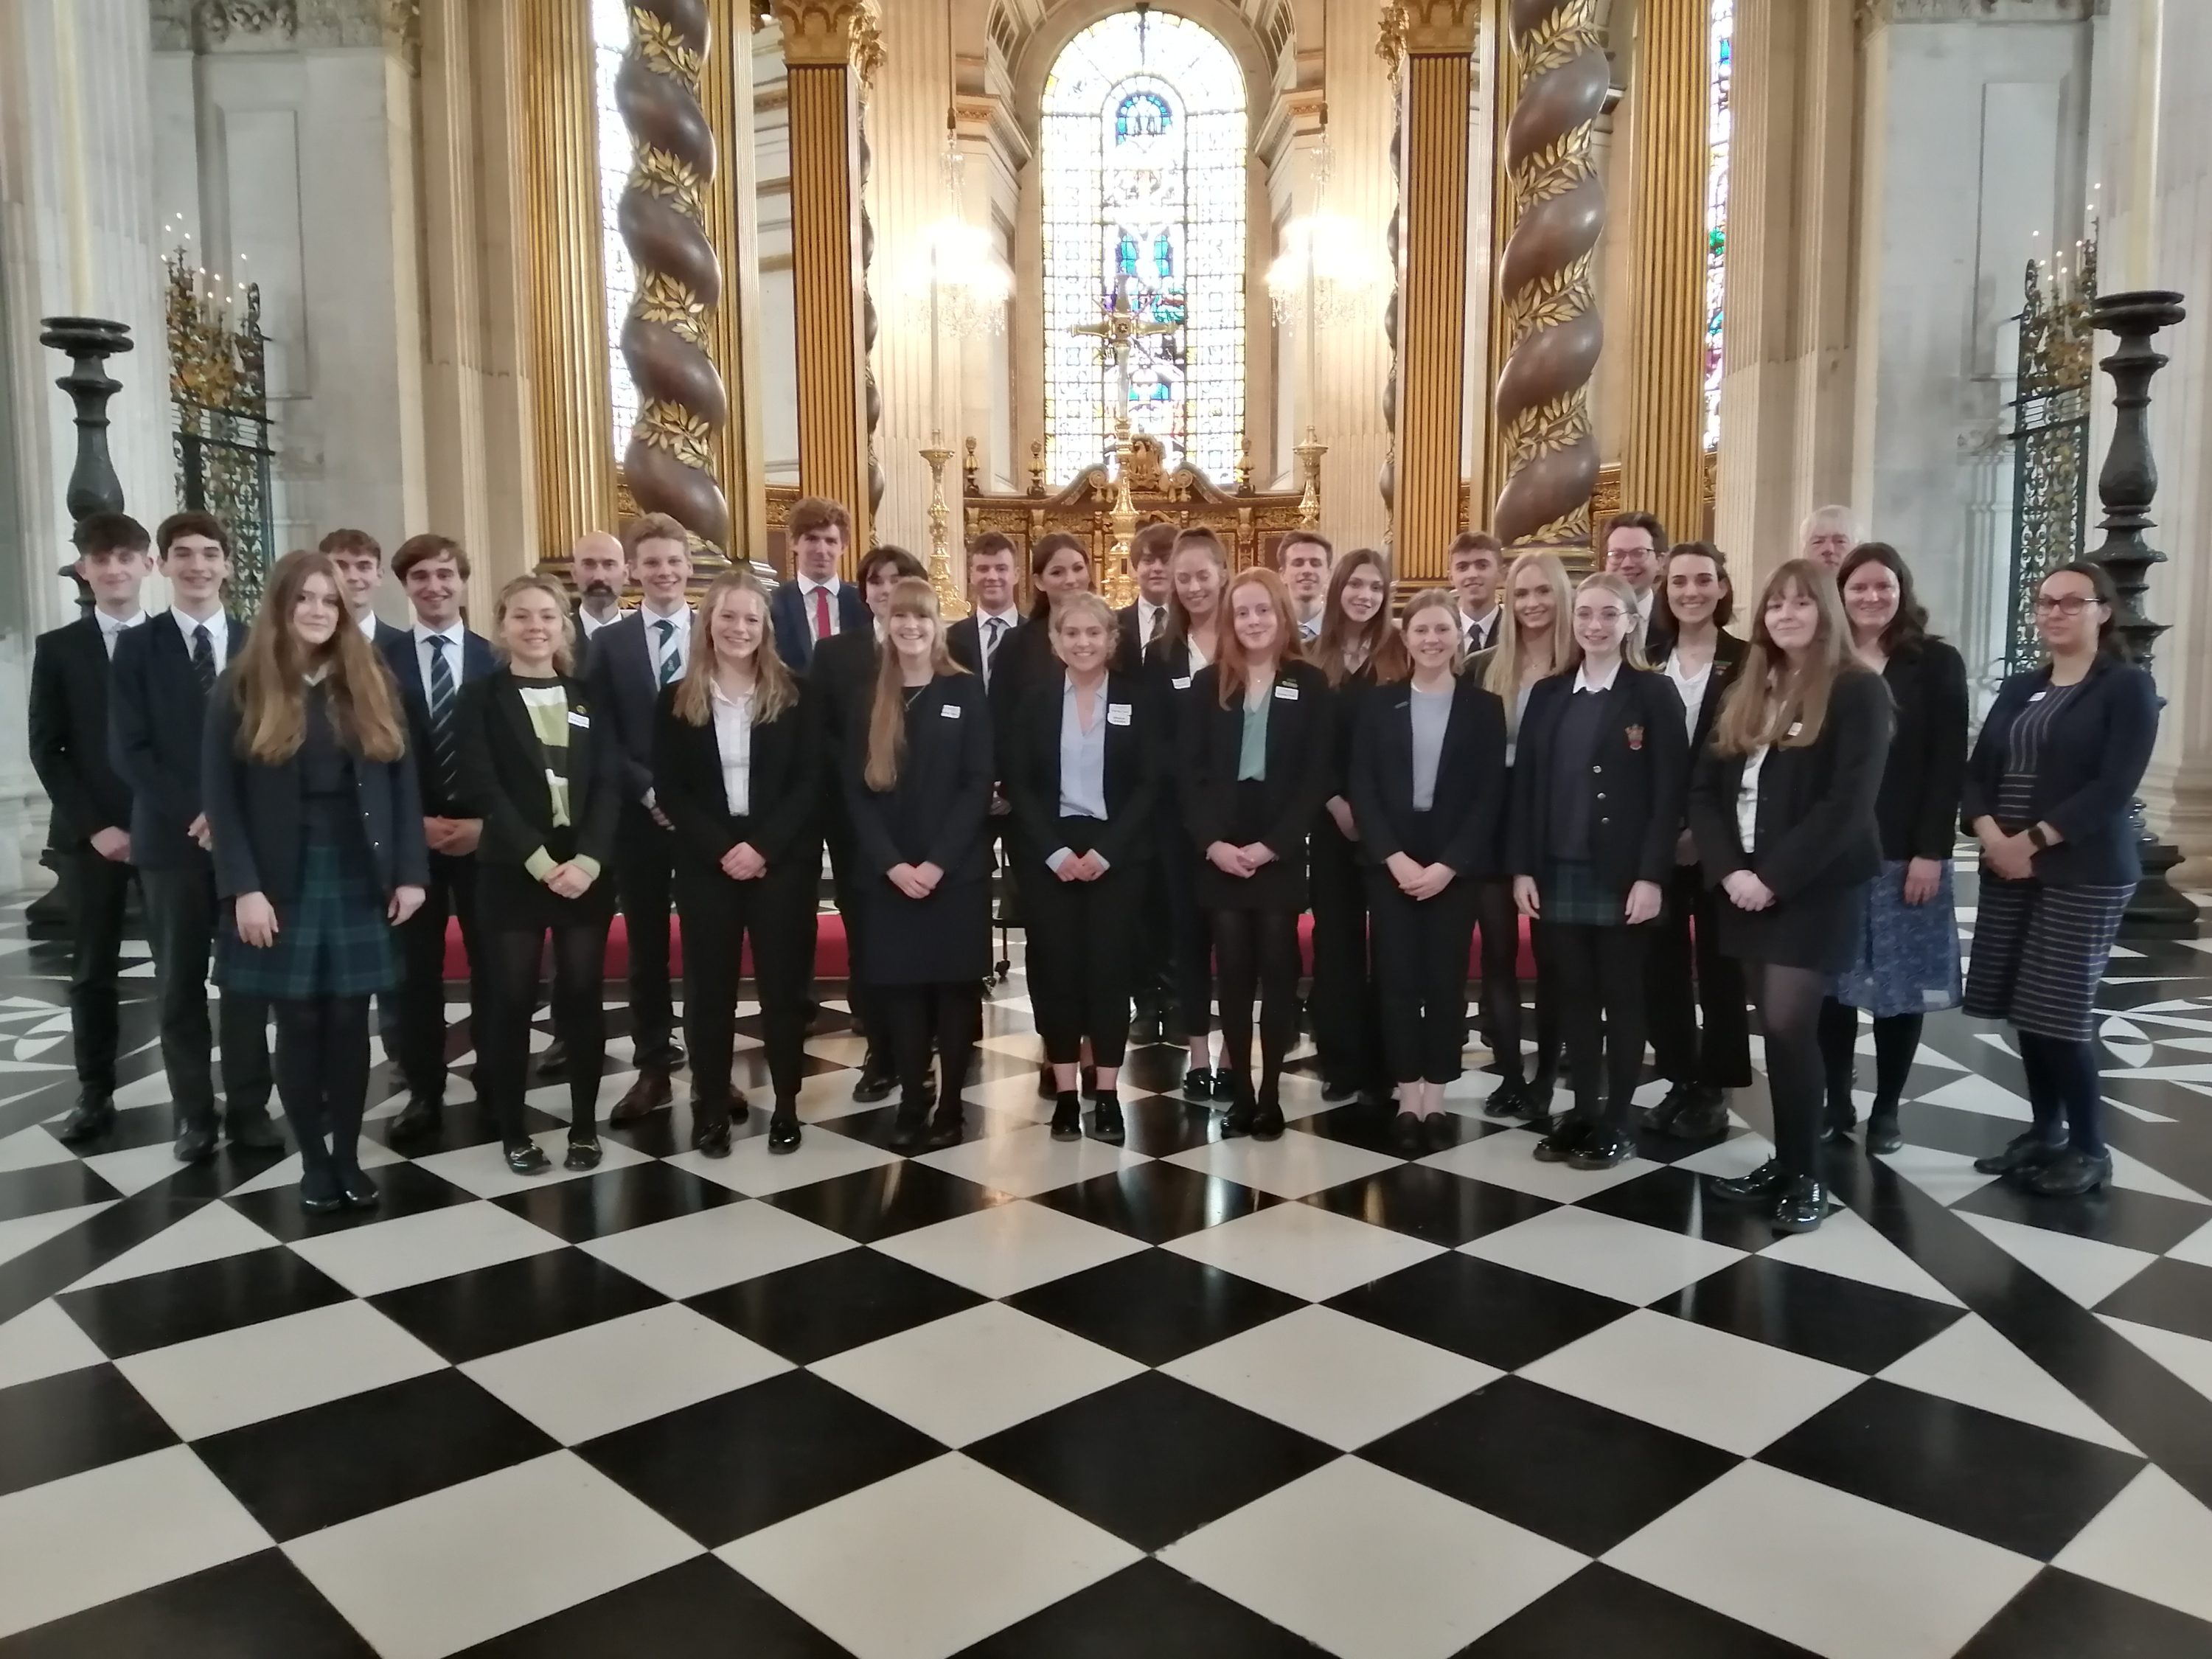 RGS pupils perform Evensong at London’s iconic St Paul’s Cathedral